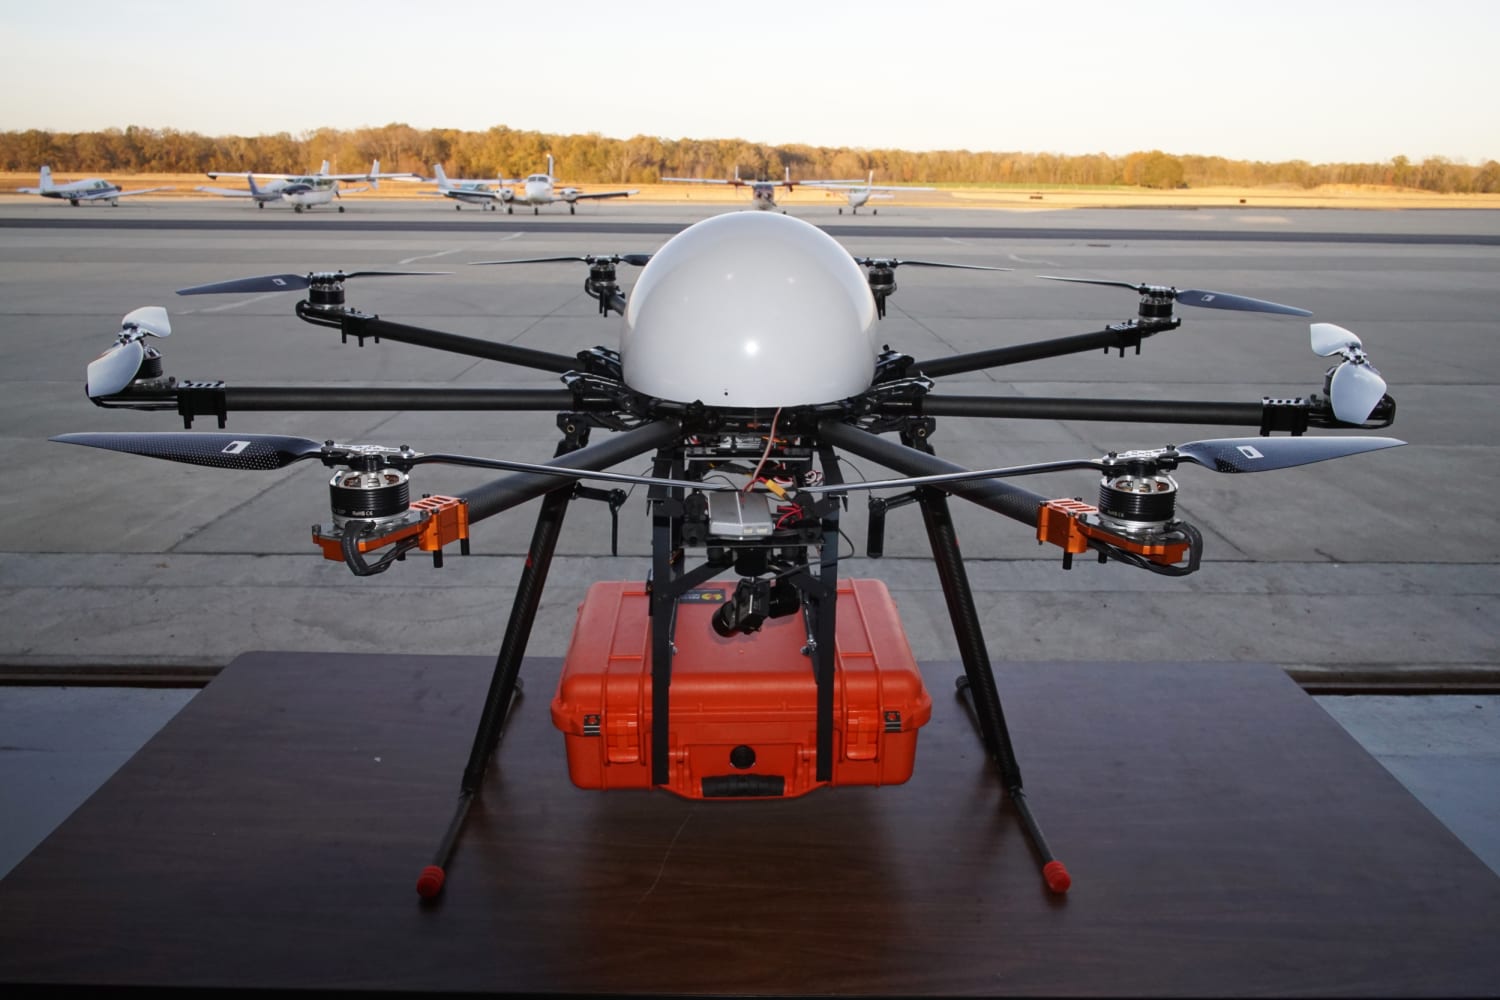 One of These Drones Could Save Your Life